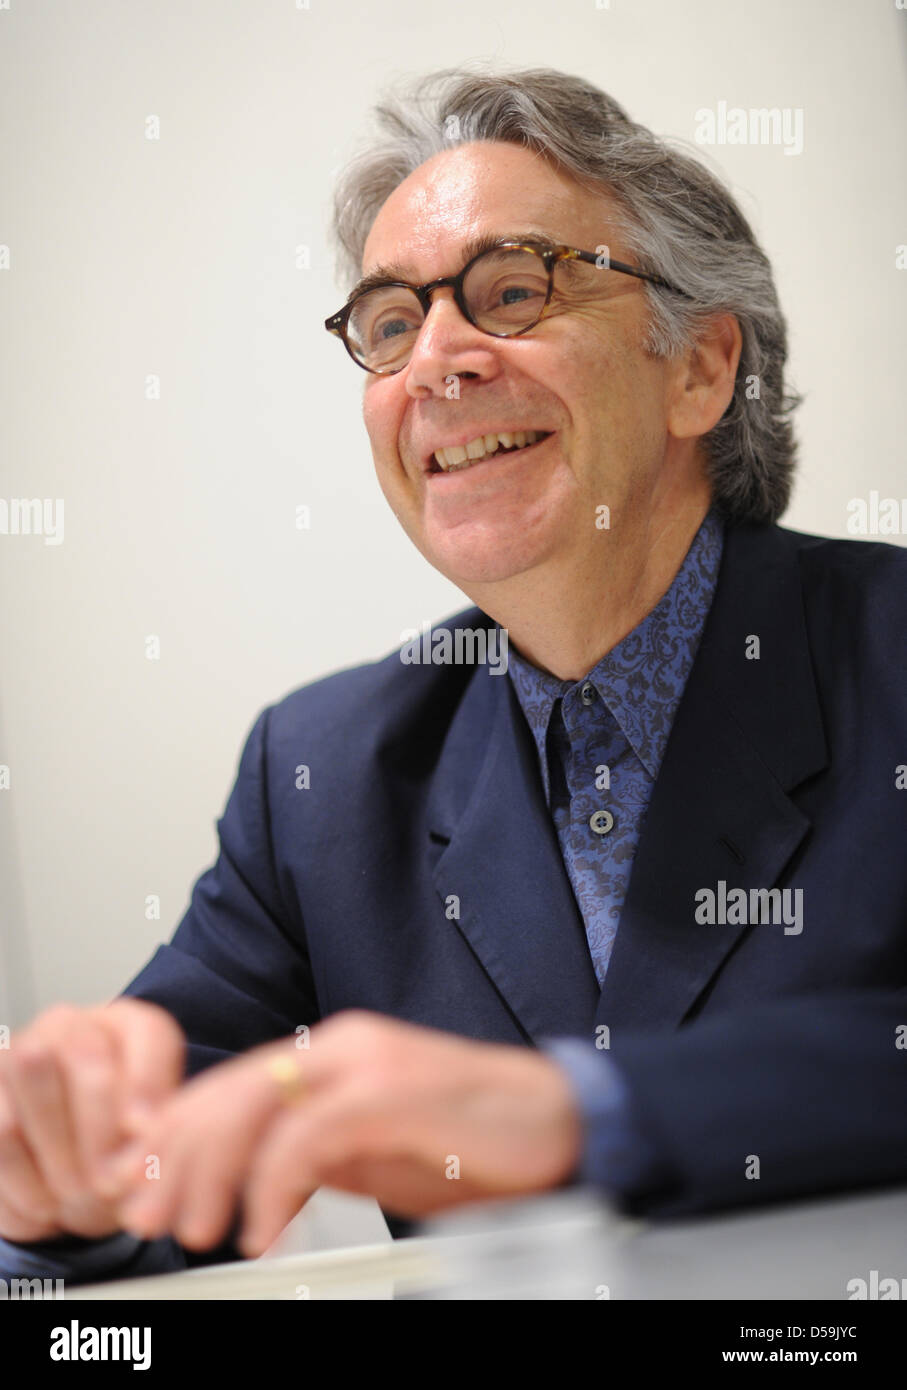 Canadian soundtrack composer Howard Leslie Shore gives an interview in Munich, Germany on 26 June 2010. Born on 18 October 1946, Shore has composed the original soundtracks to more than 40 film including 'The Lord of the Rings'. Photo: Andreas Gebert Stock Photo